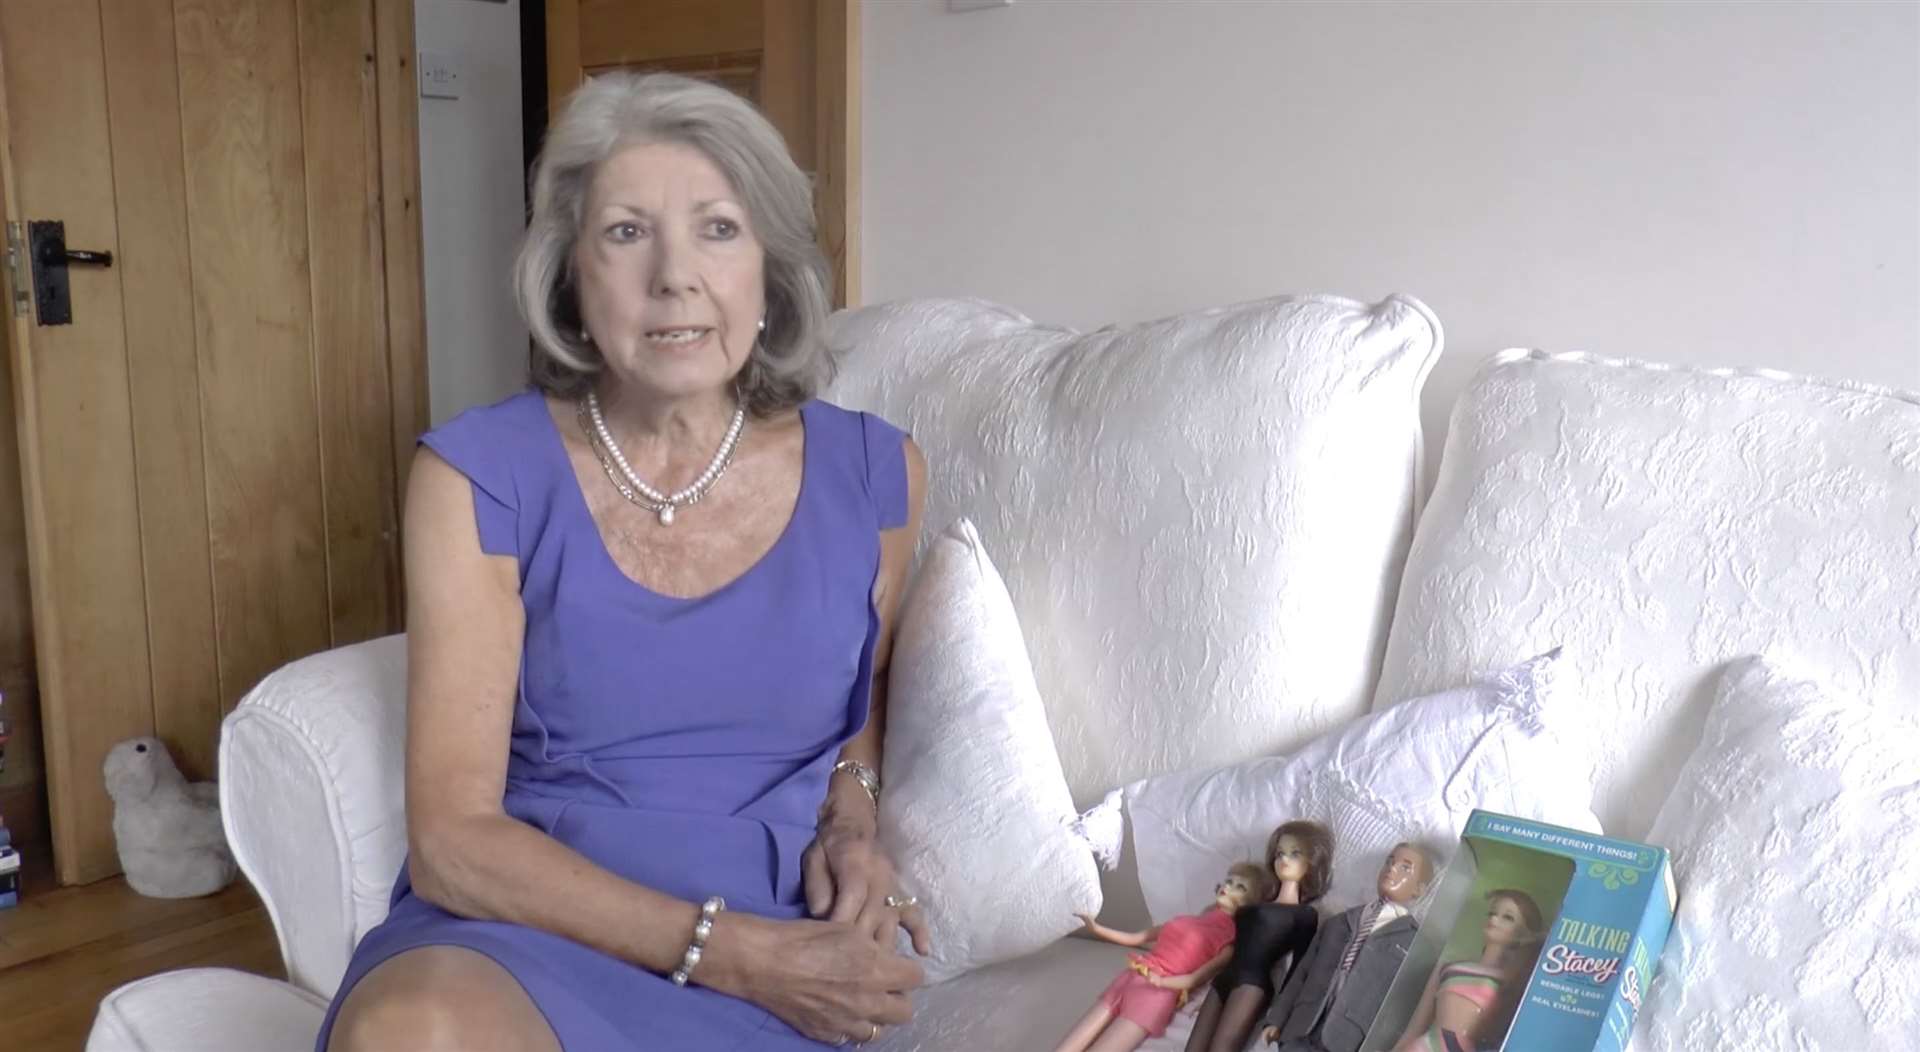 Janie Wellborne, from Sevenoaks, is the UK voice of the 1960s Barbie doll